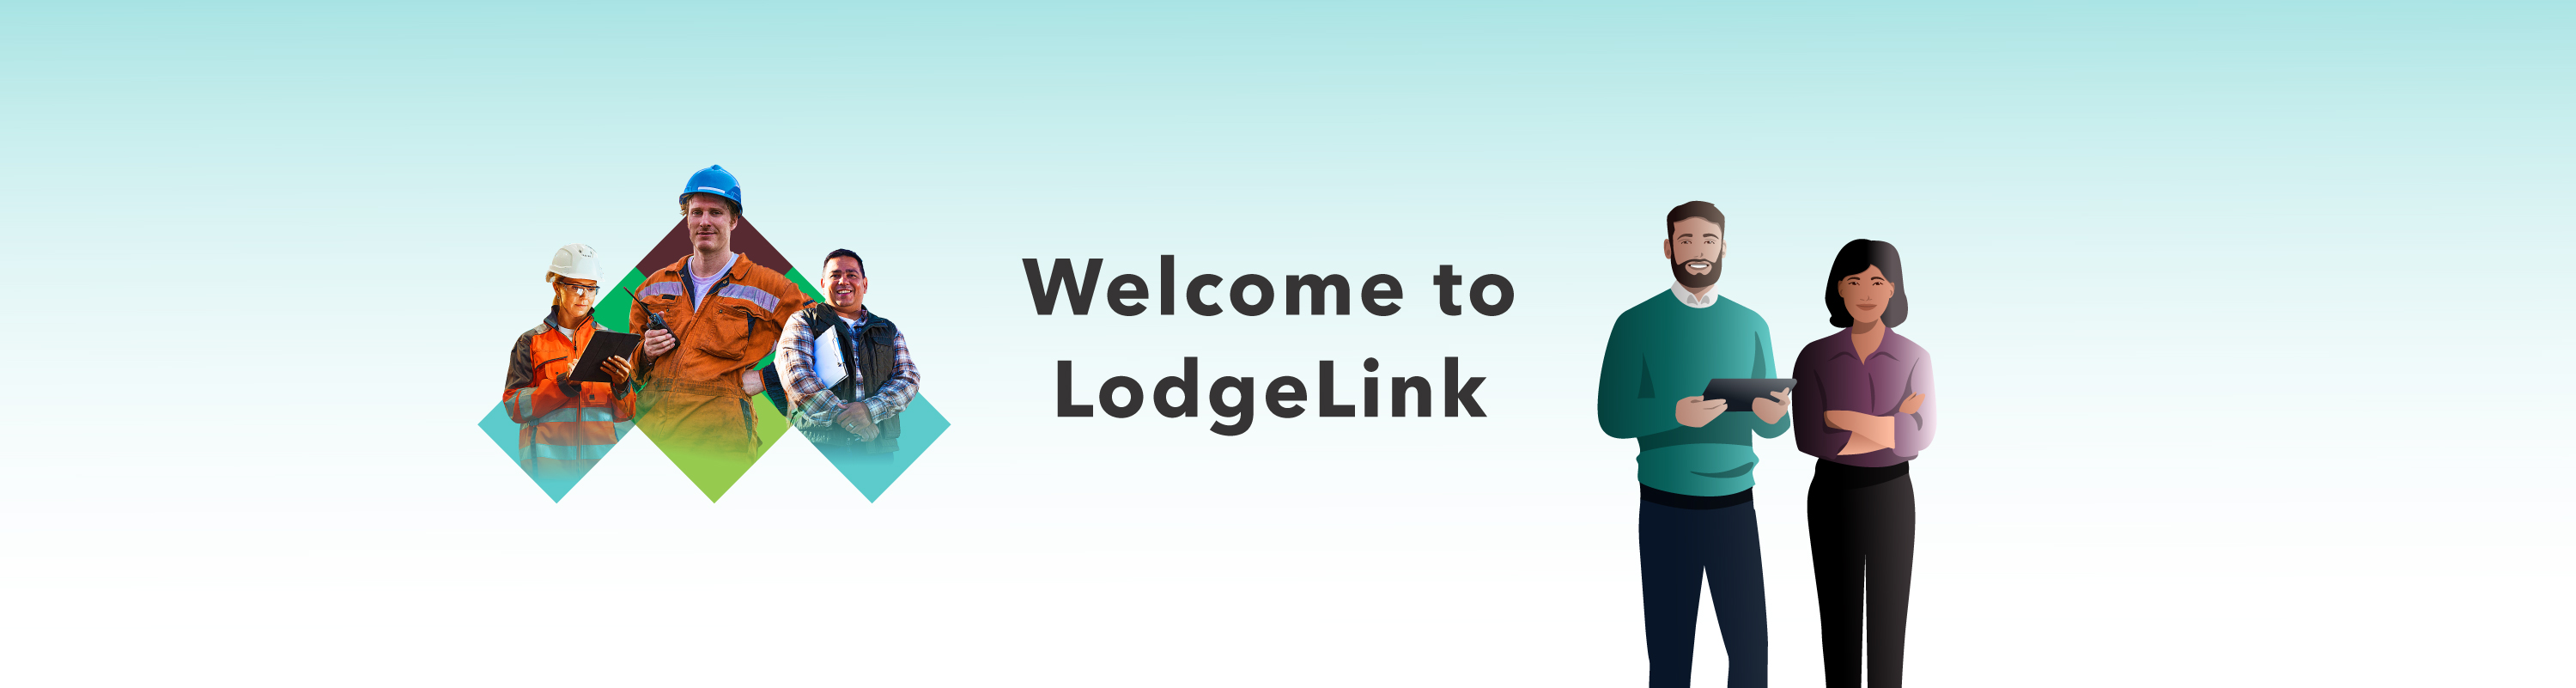 Welcome to LodgeLink Banner 